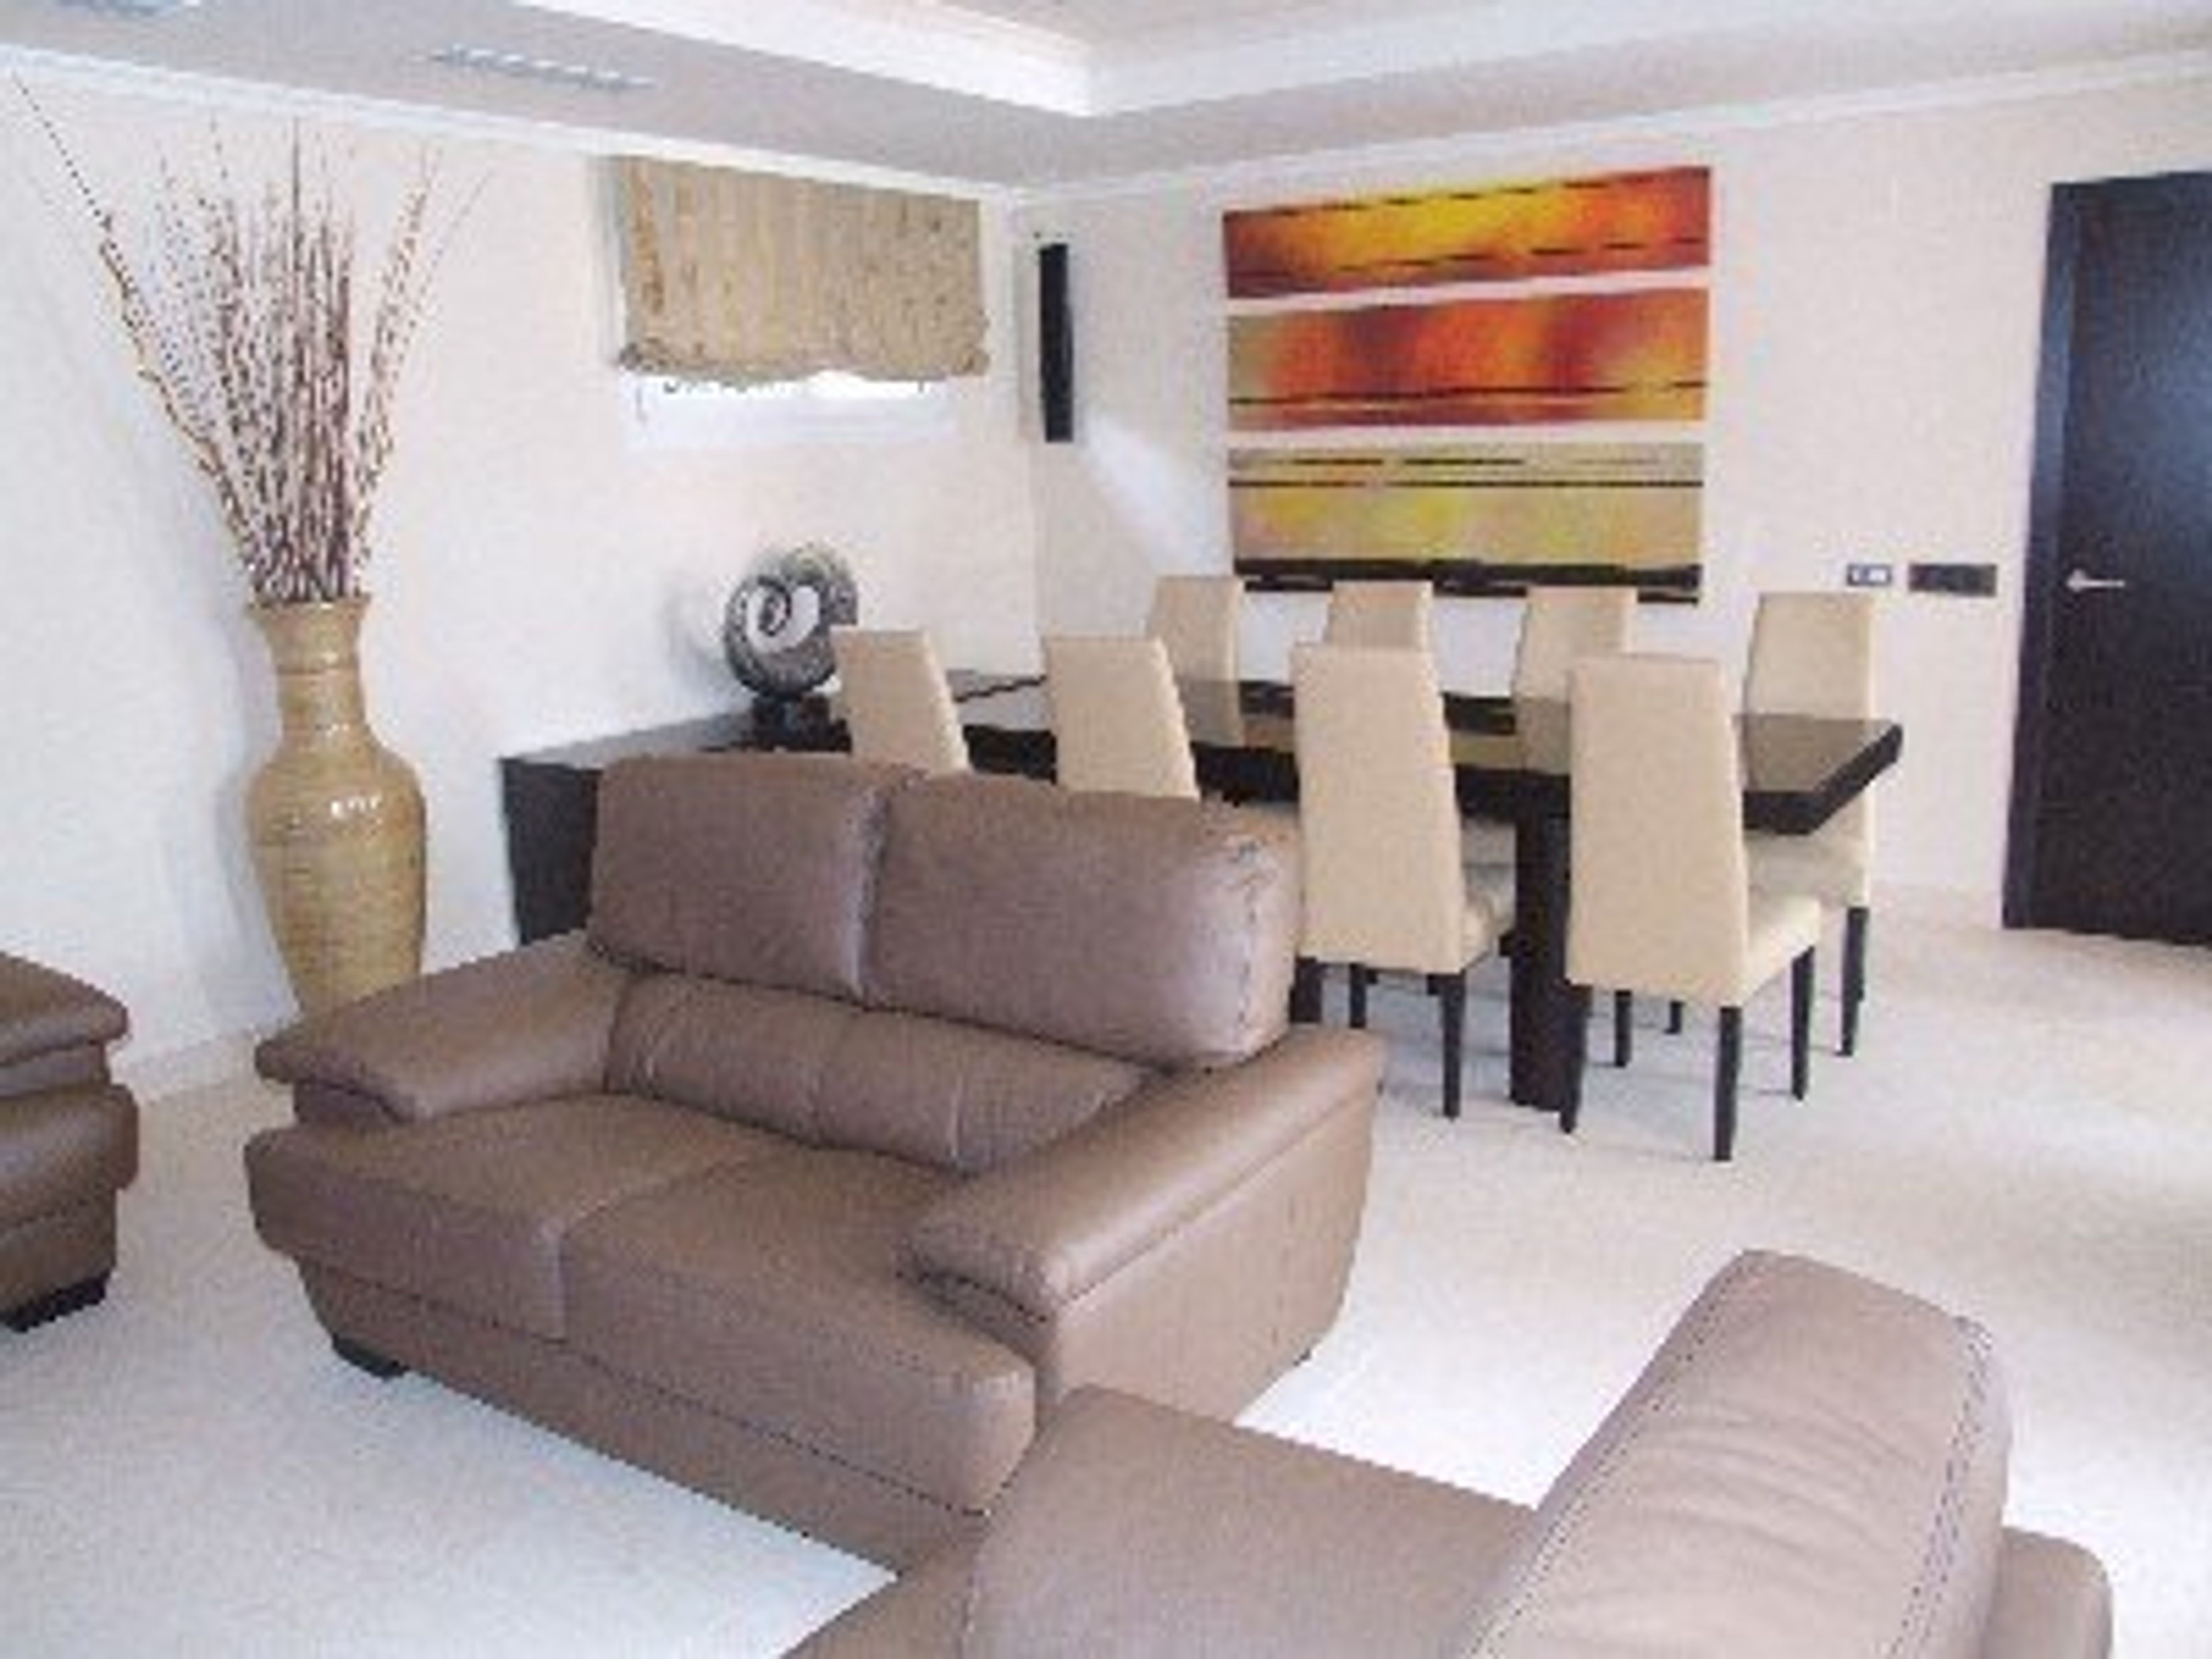 Spavious and bright open plan living area.